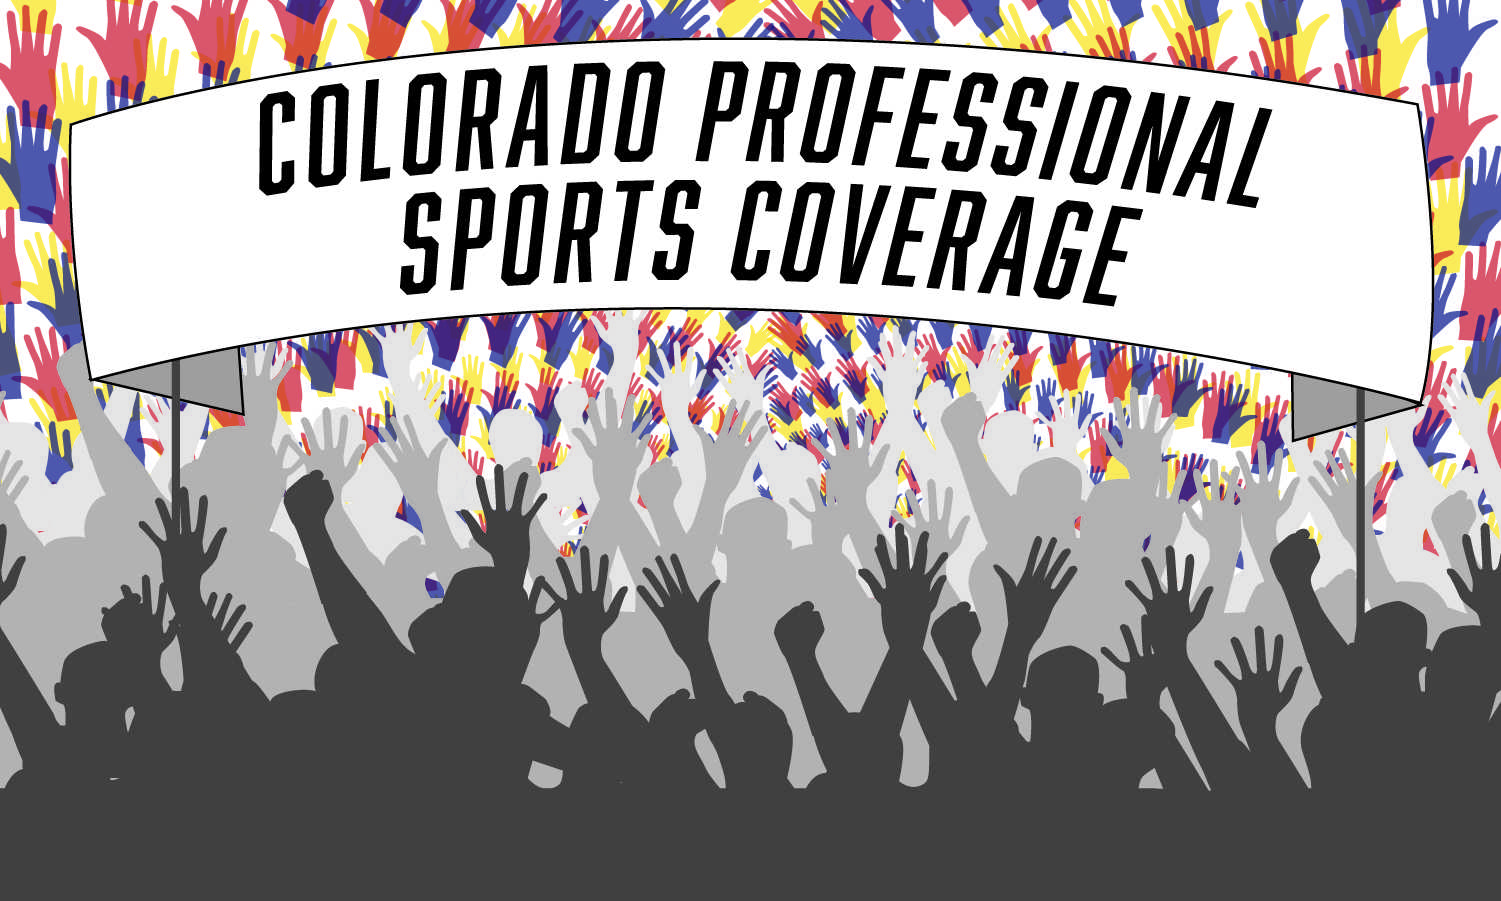 Graphic illustration depicting a crowd of silhouetted people (like in a sports event) with a banner above reading "Colorado Professional Sports Coverage."